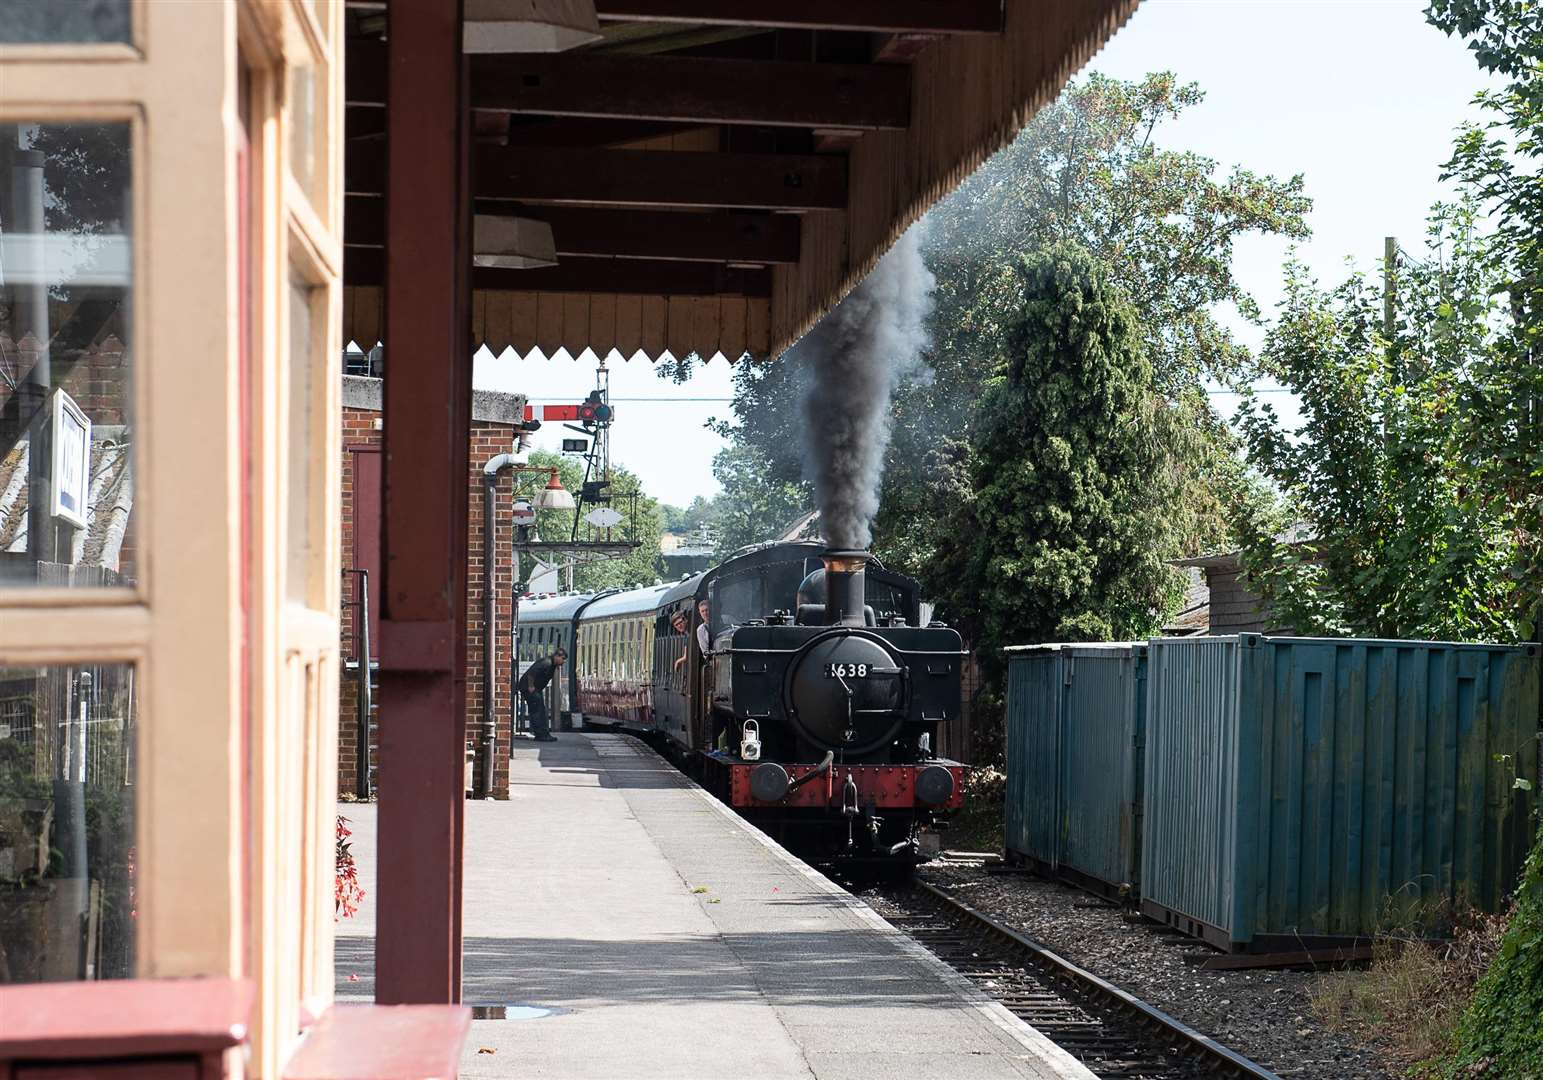 A train entering the Rolvenden station on the volunteer-run railway